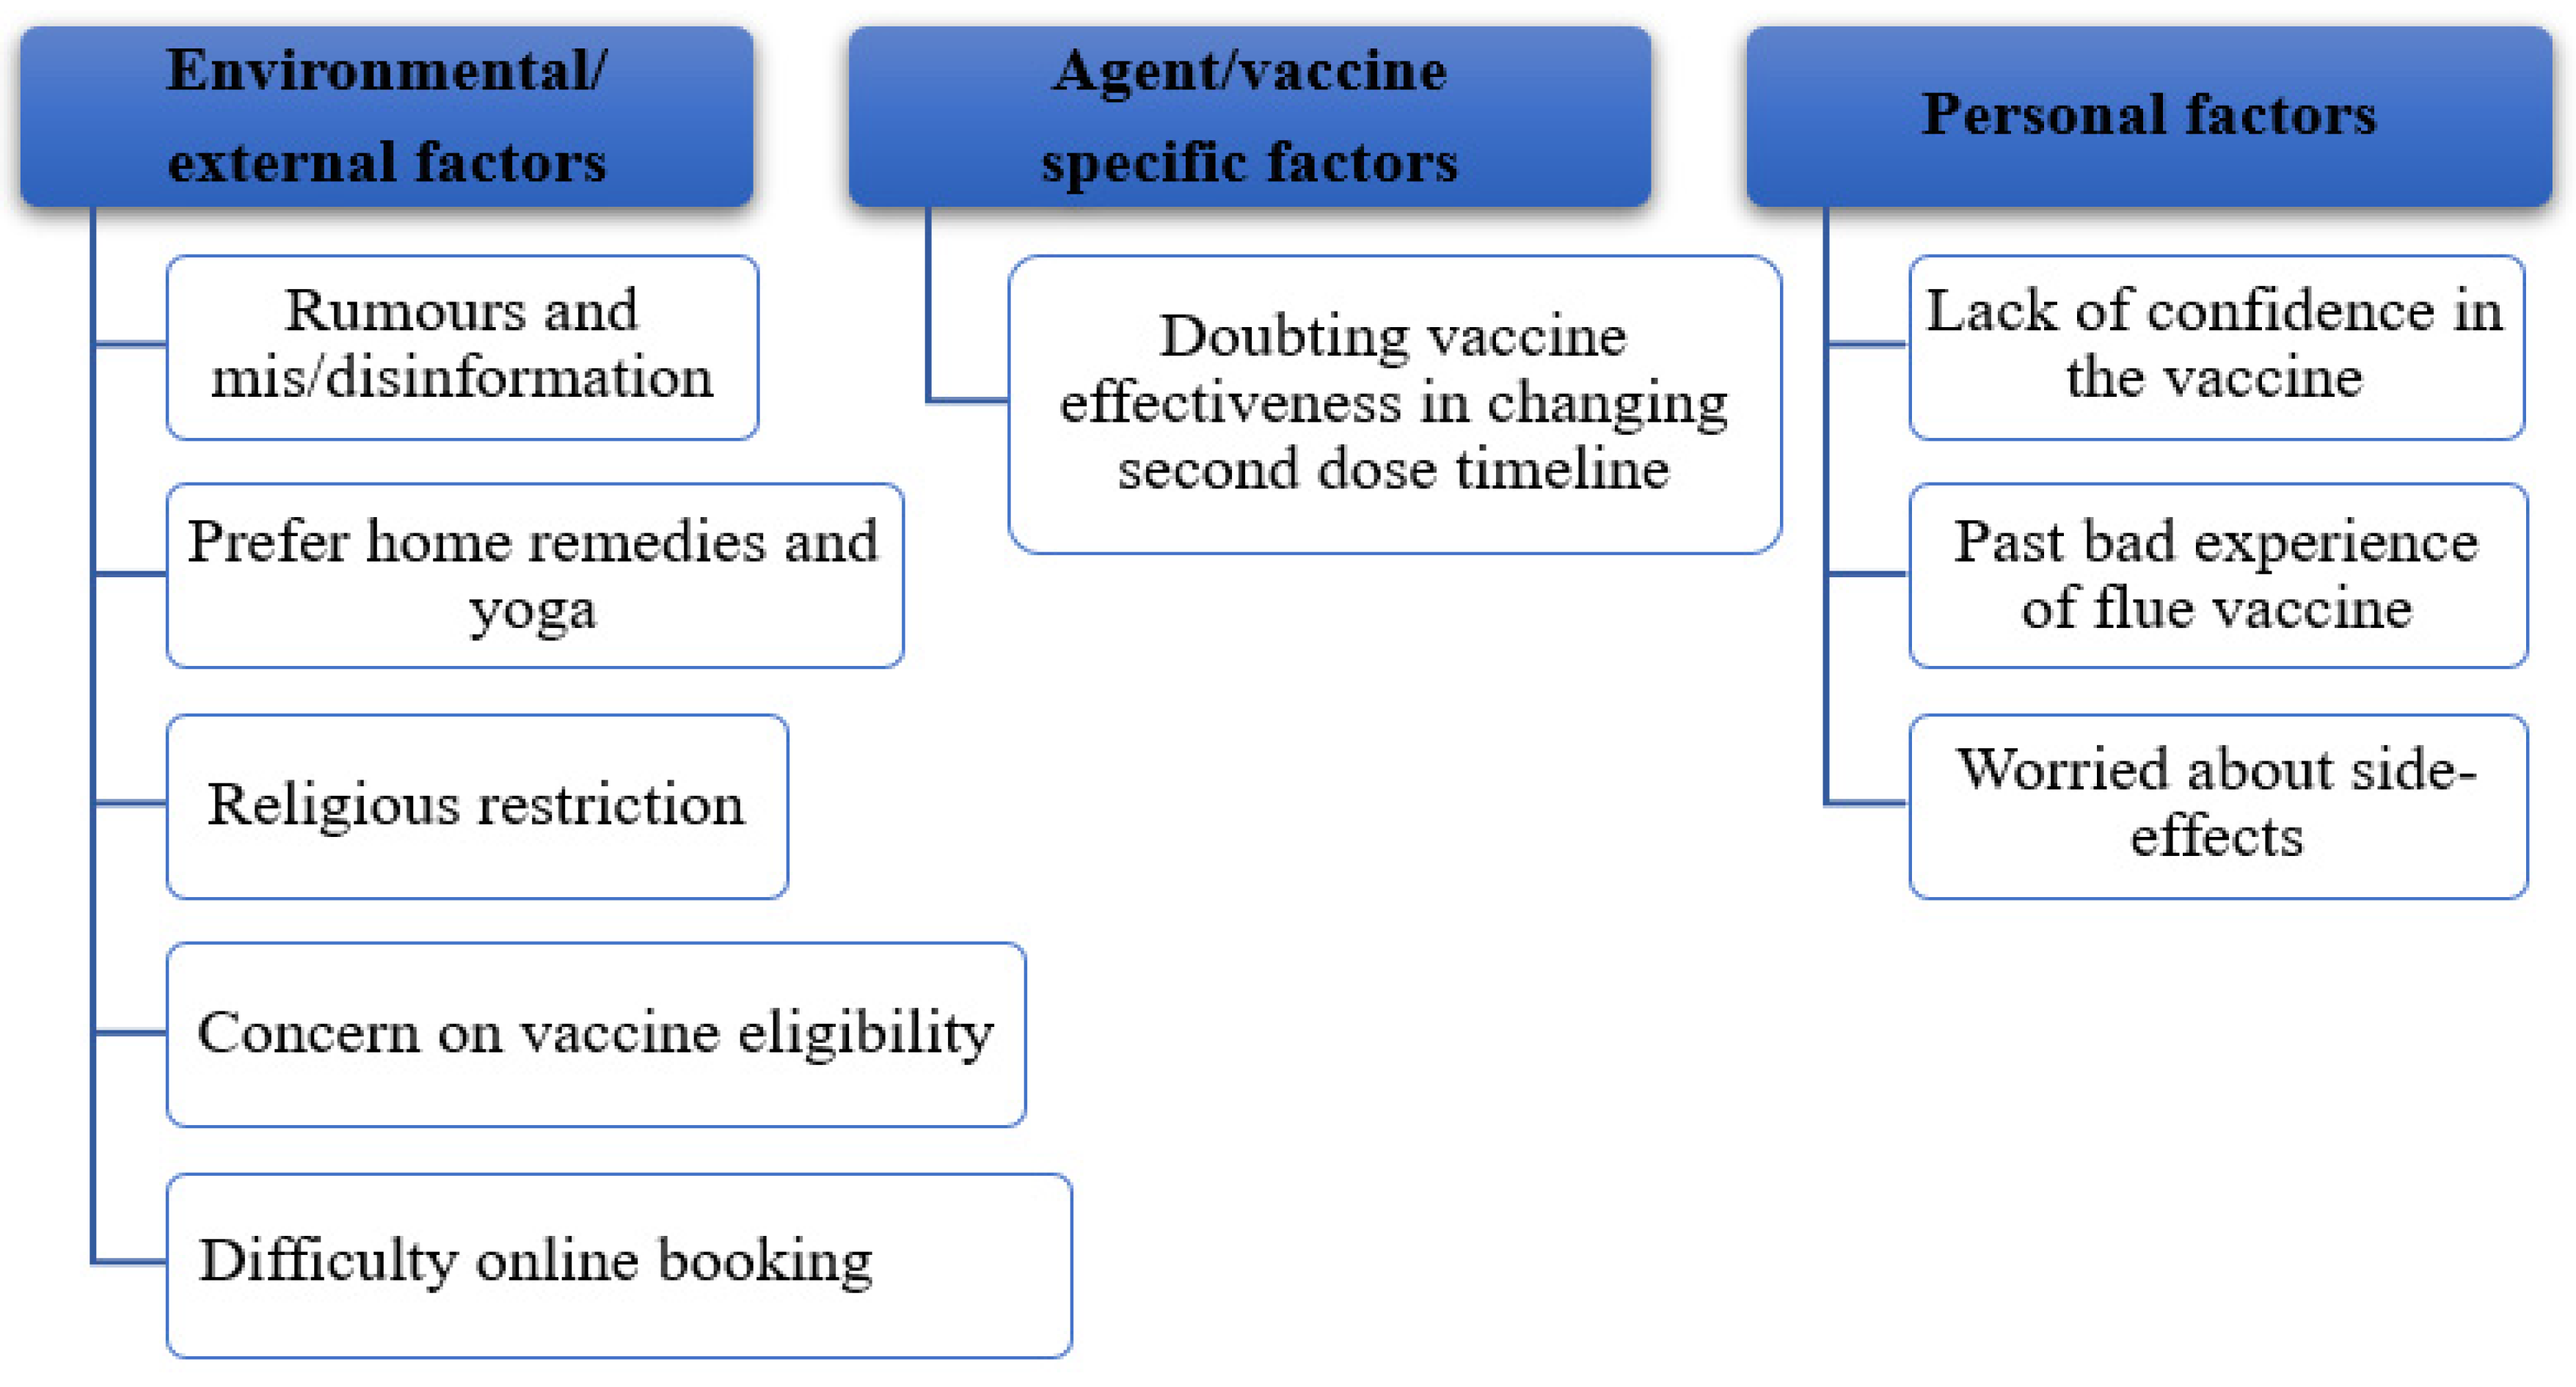 https://www.mdpi.com/vaccines/vaccines-10-00780/article_deploy/html/images/vaccines-10-00780-g001.png